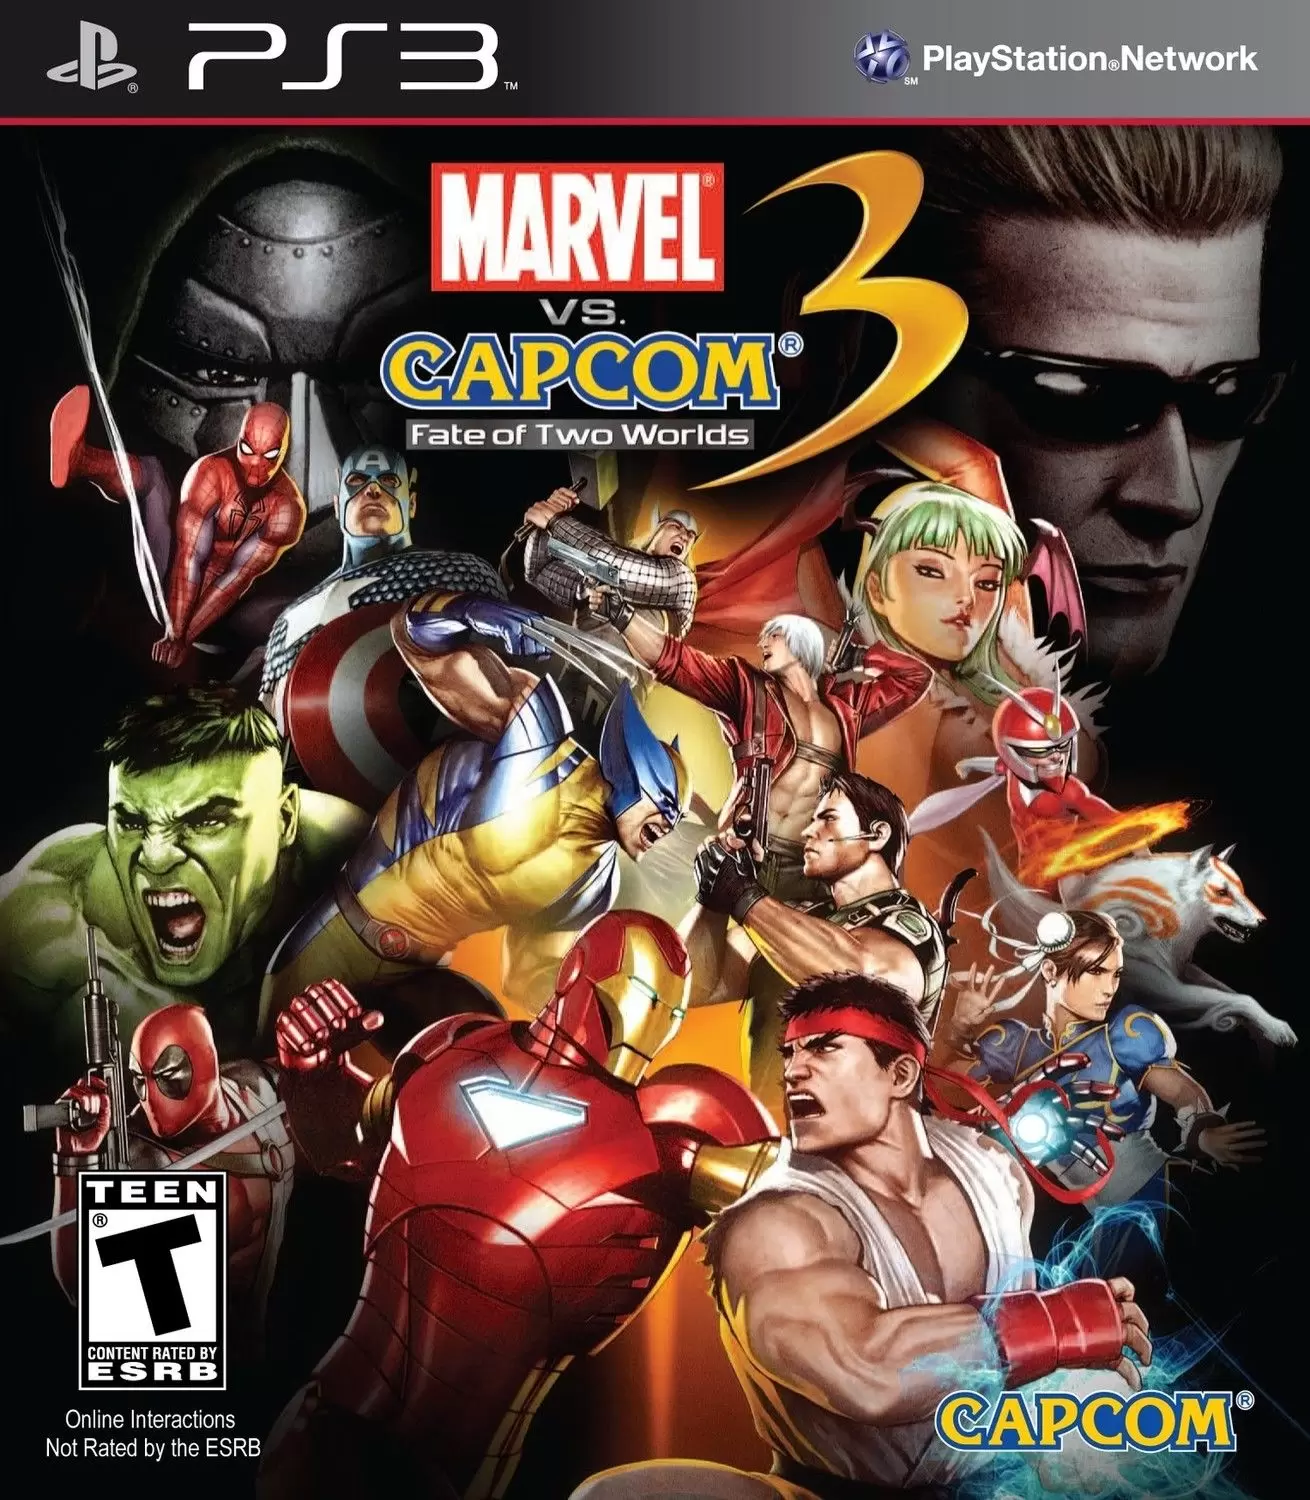 PS3 Games - Marvel vs. Capcom 3: Fate of Two Worlds